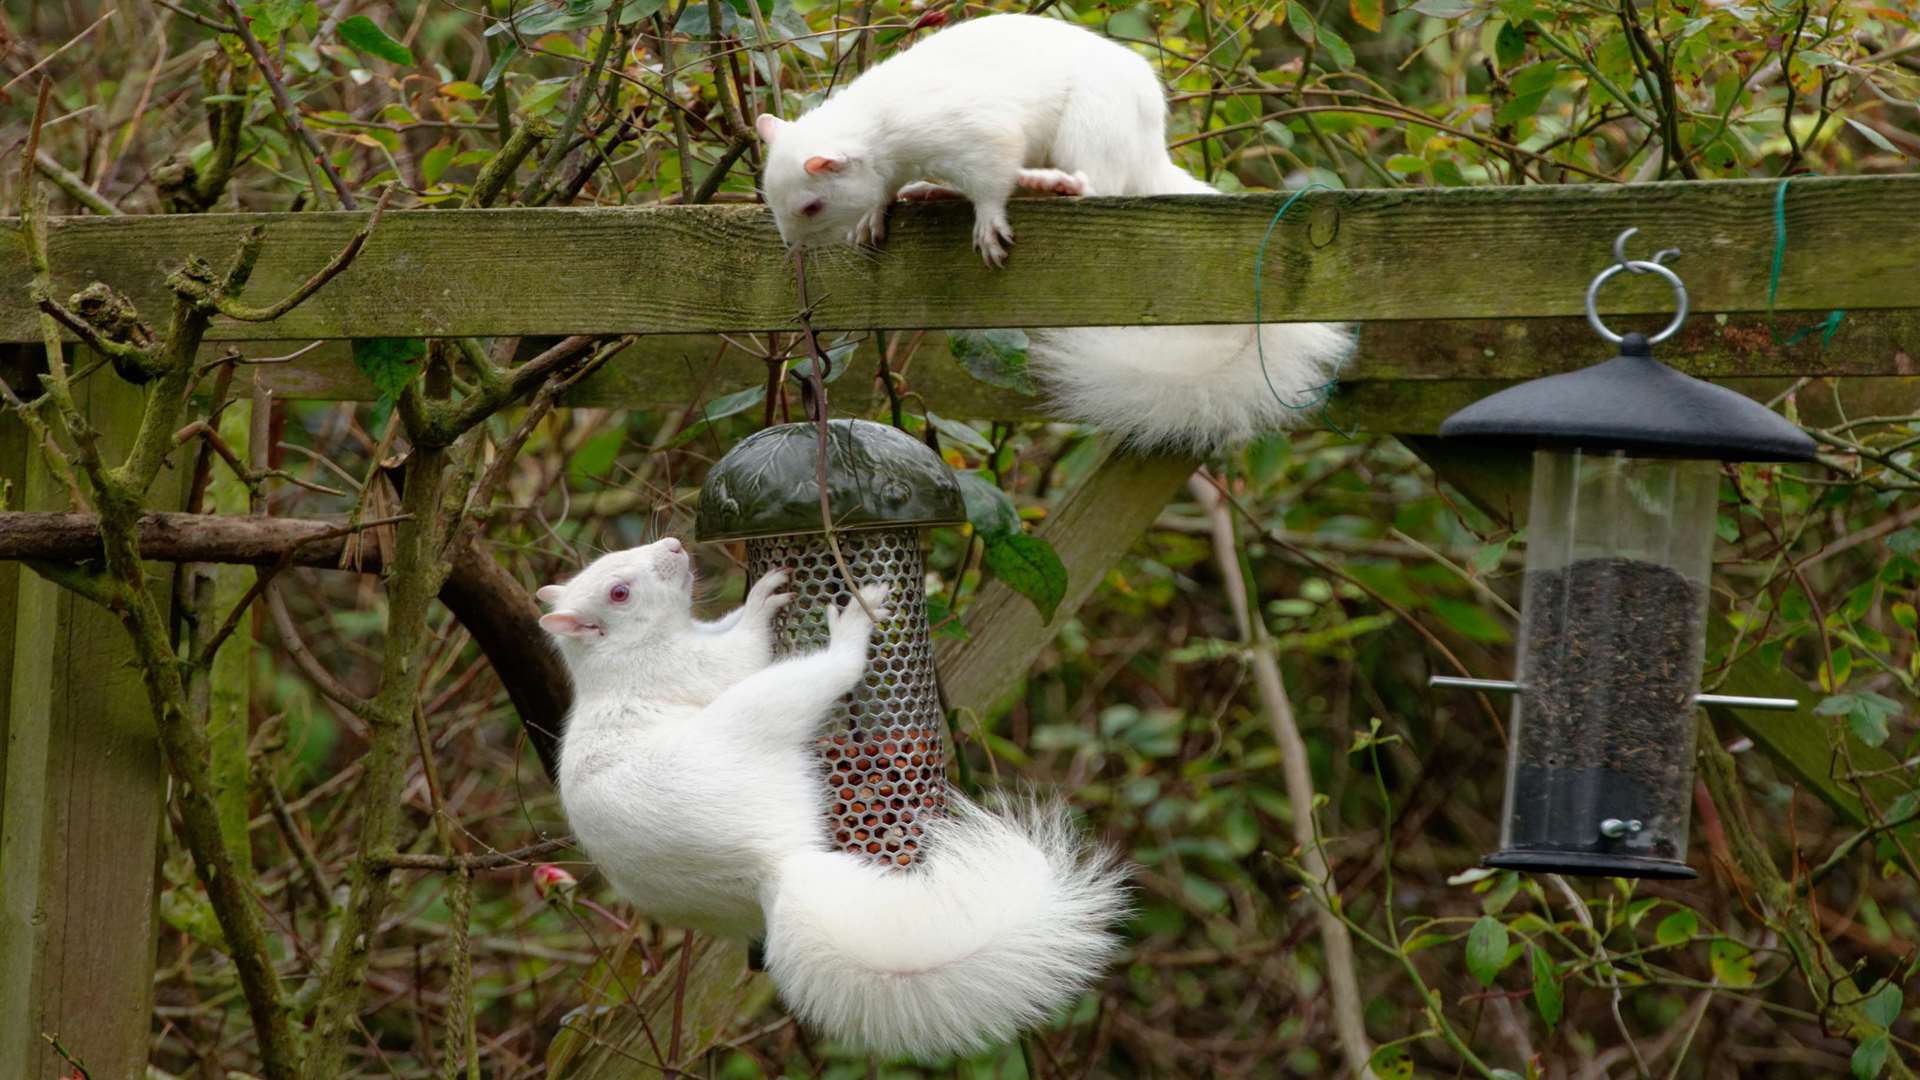 John Humble has a pair of albino squirrels that have been visiting his New Barn garden for a year